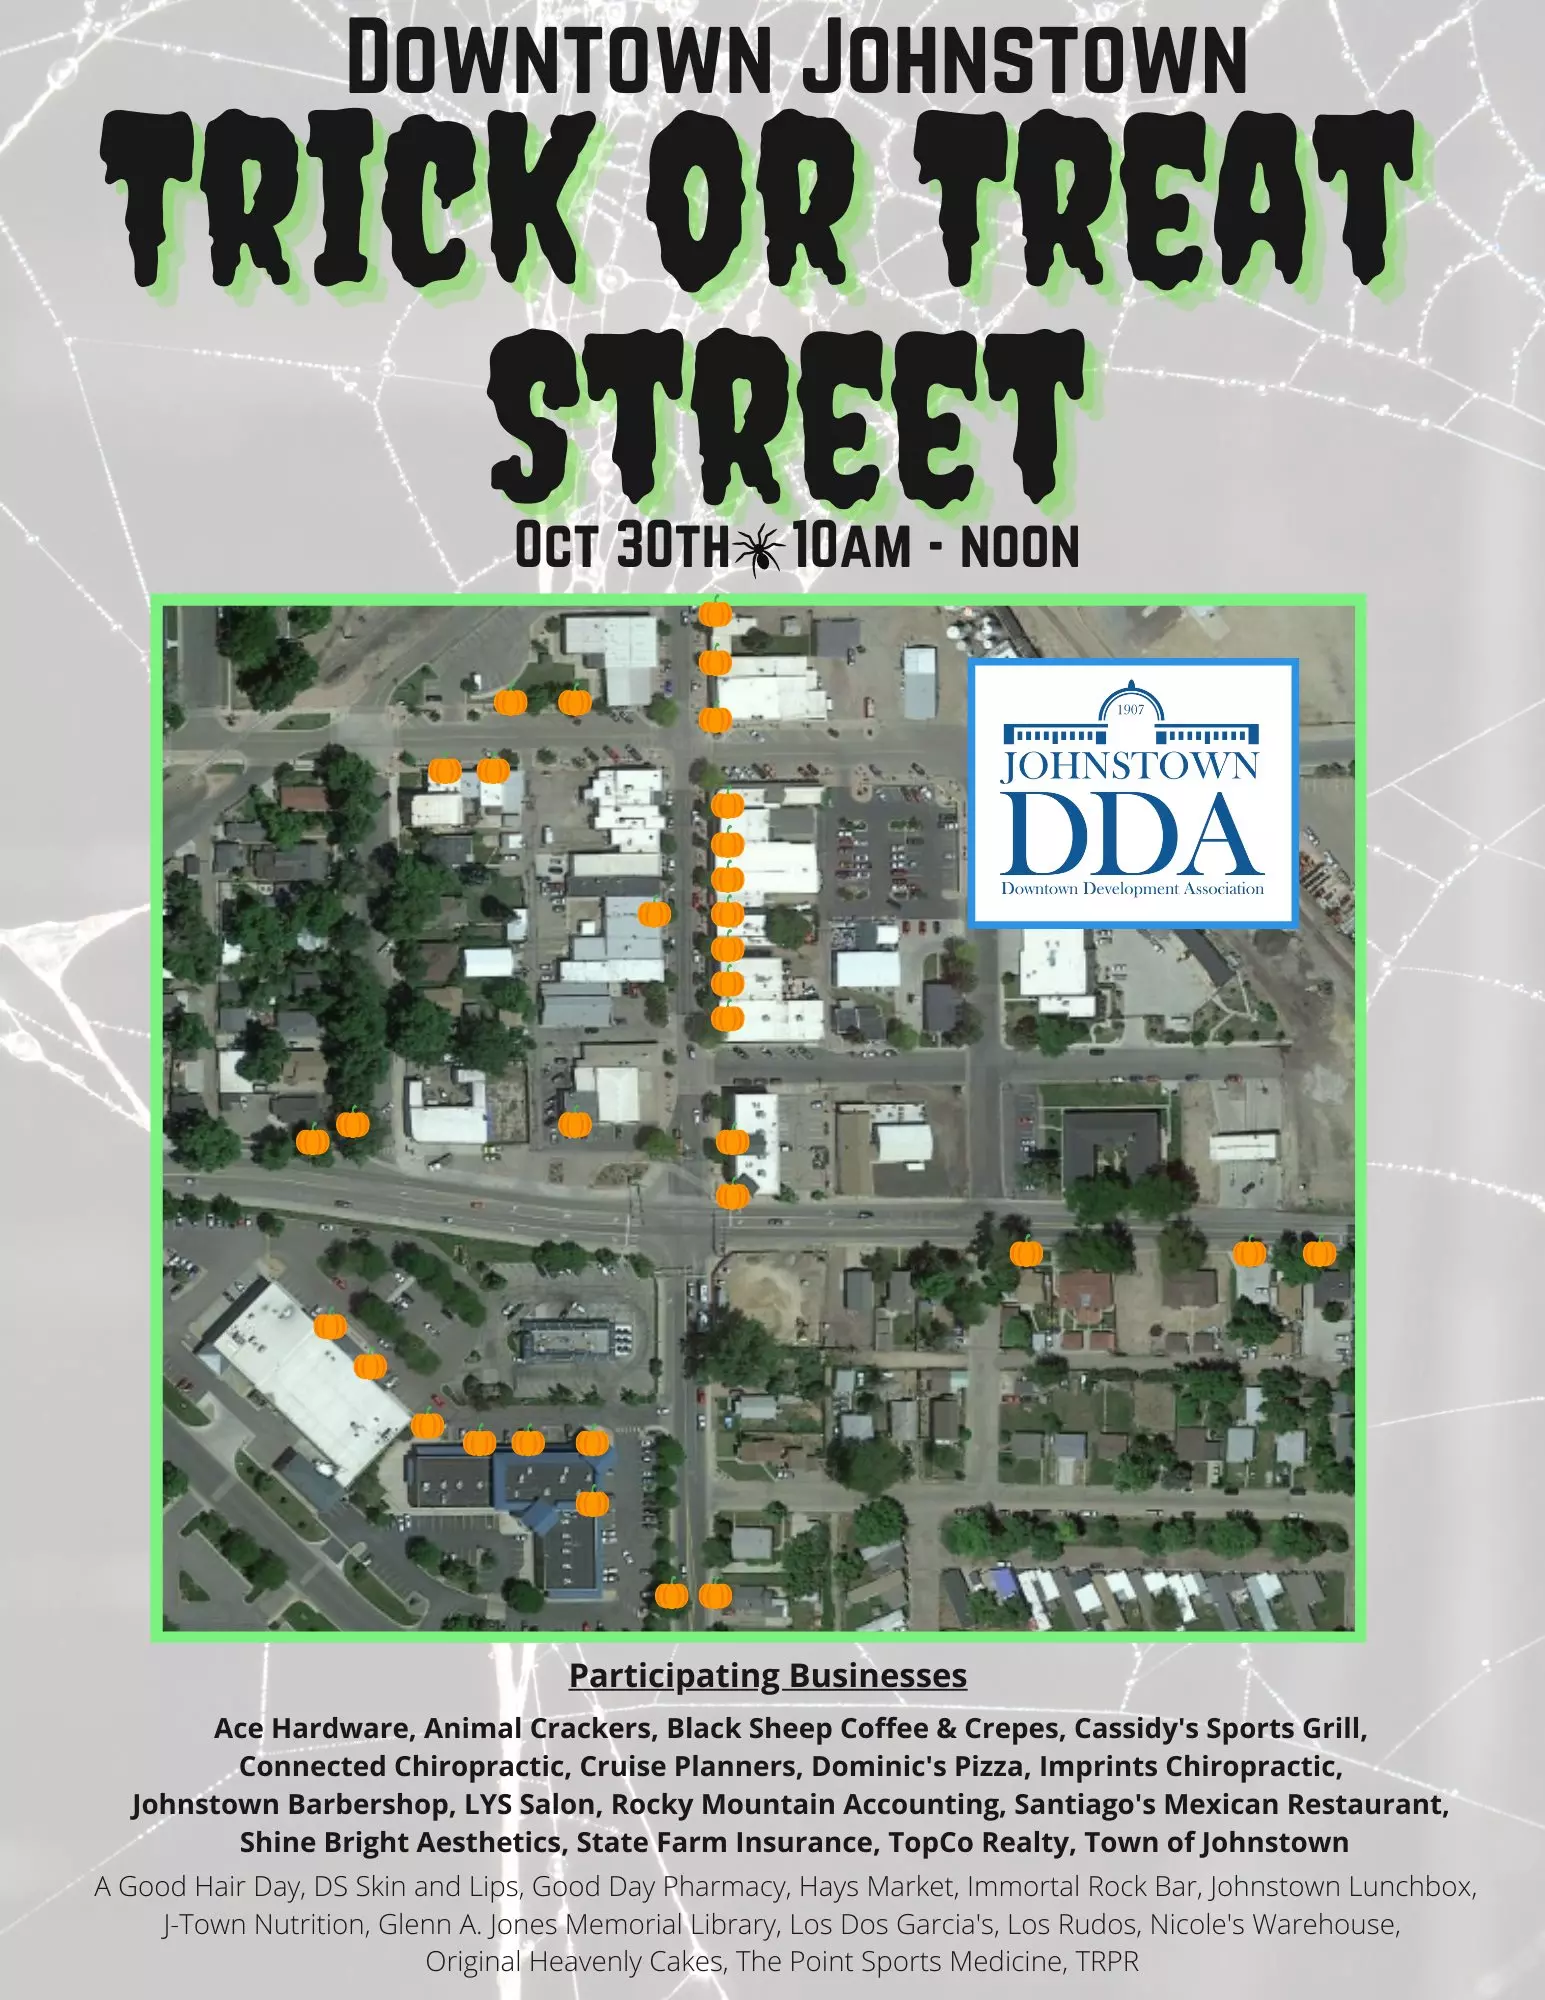 Trick or Treat Street Locations - please contact the Johnstown Downtown Development Association for more information about Trick or Treat Street Locations johnstowndda@gmail.com